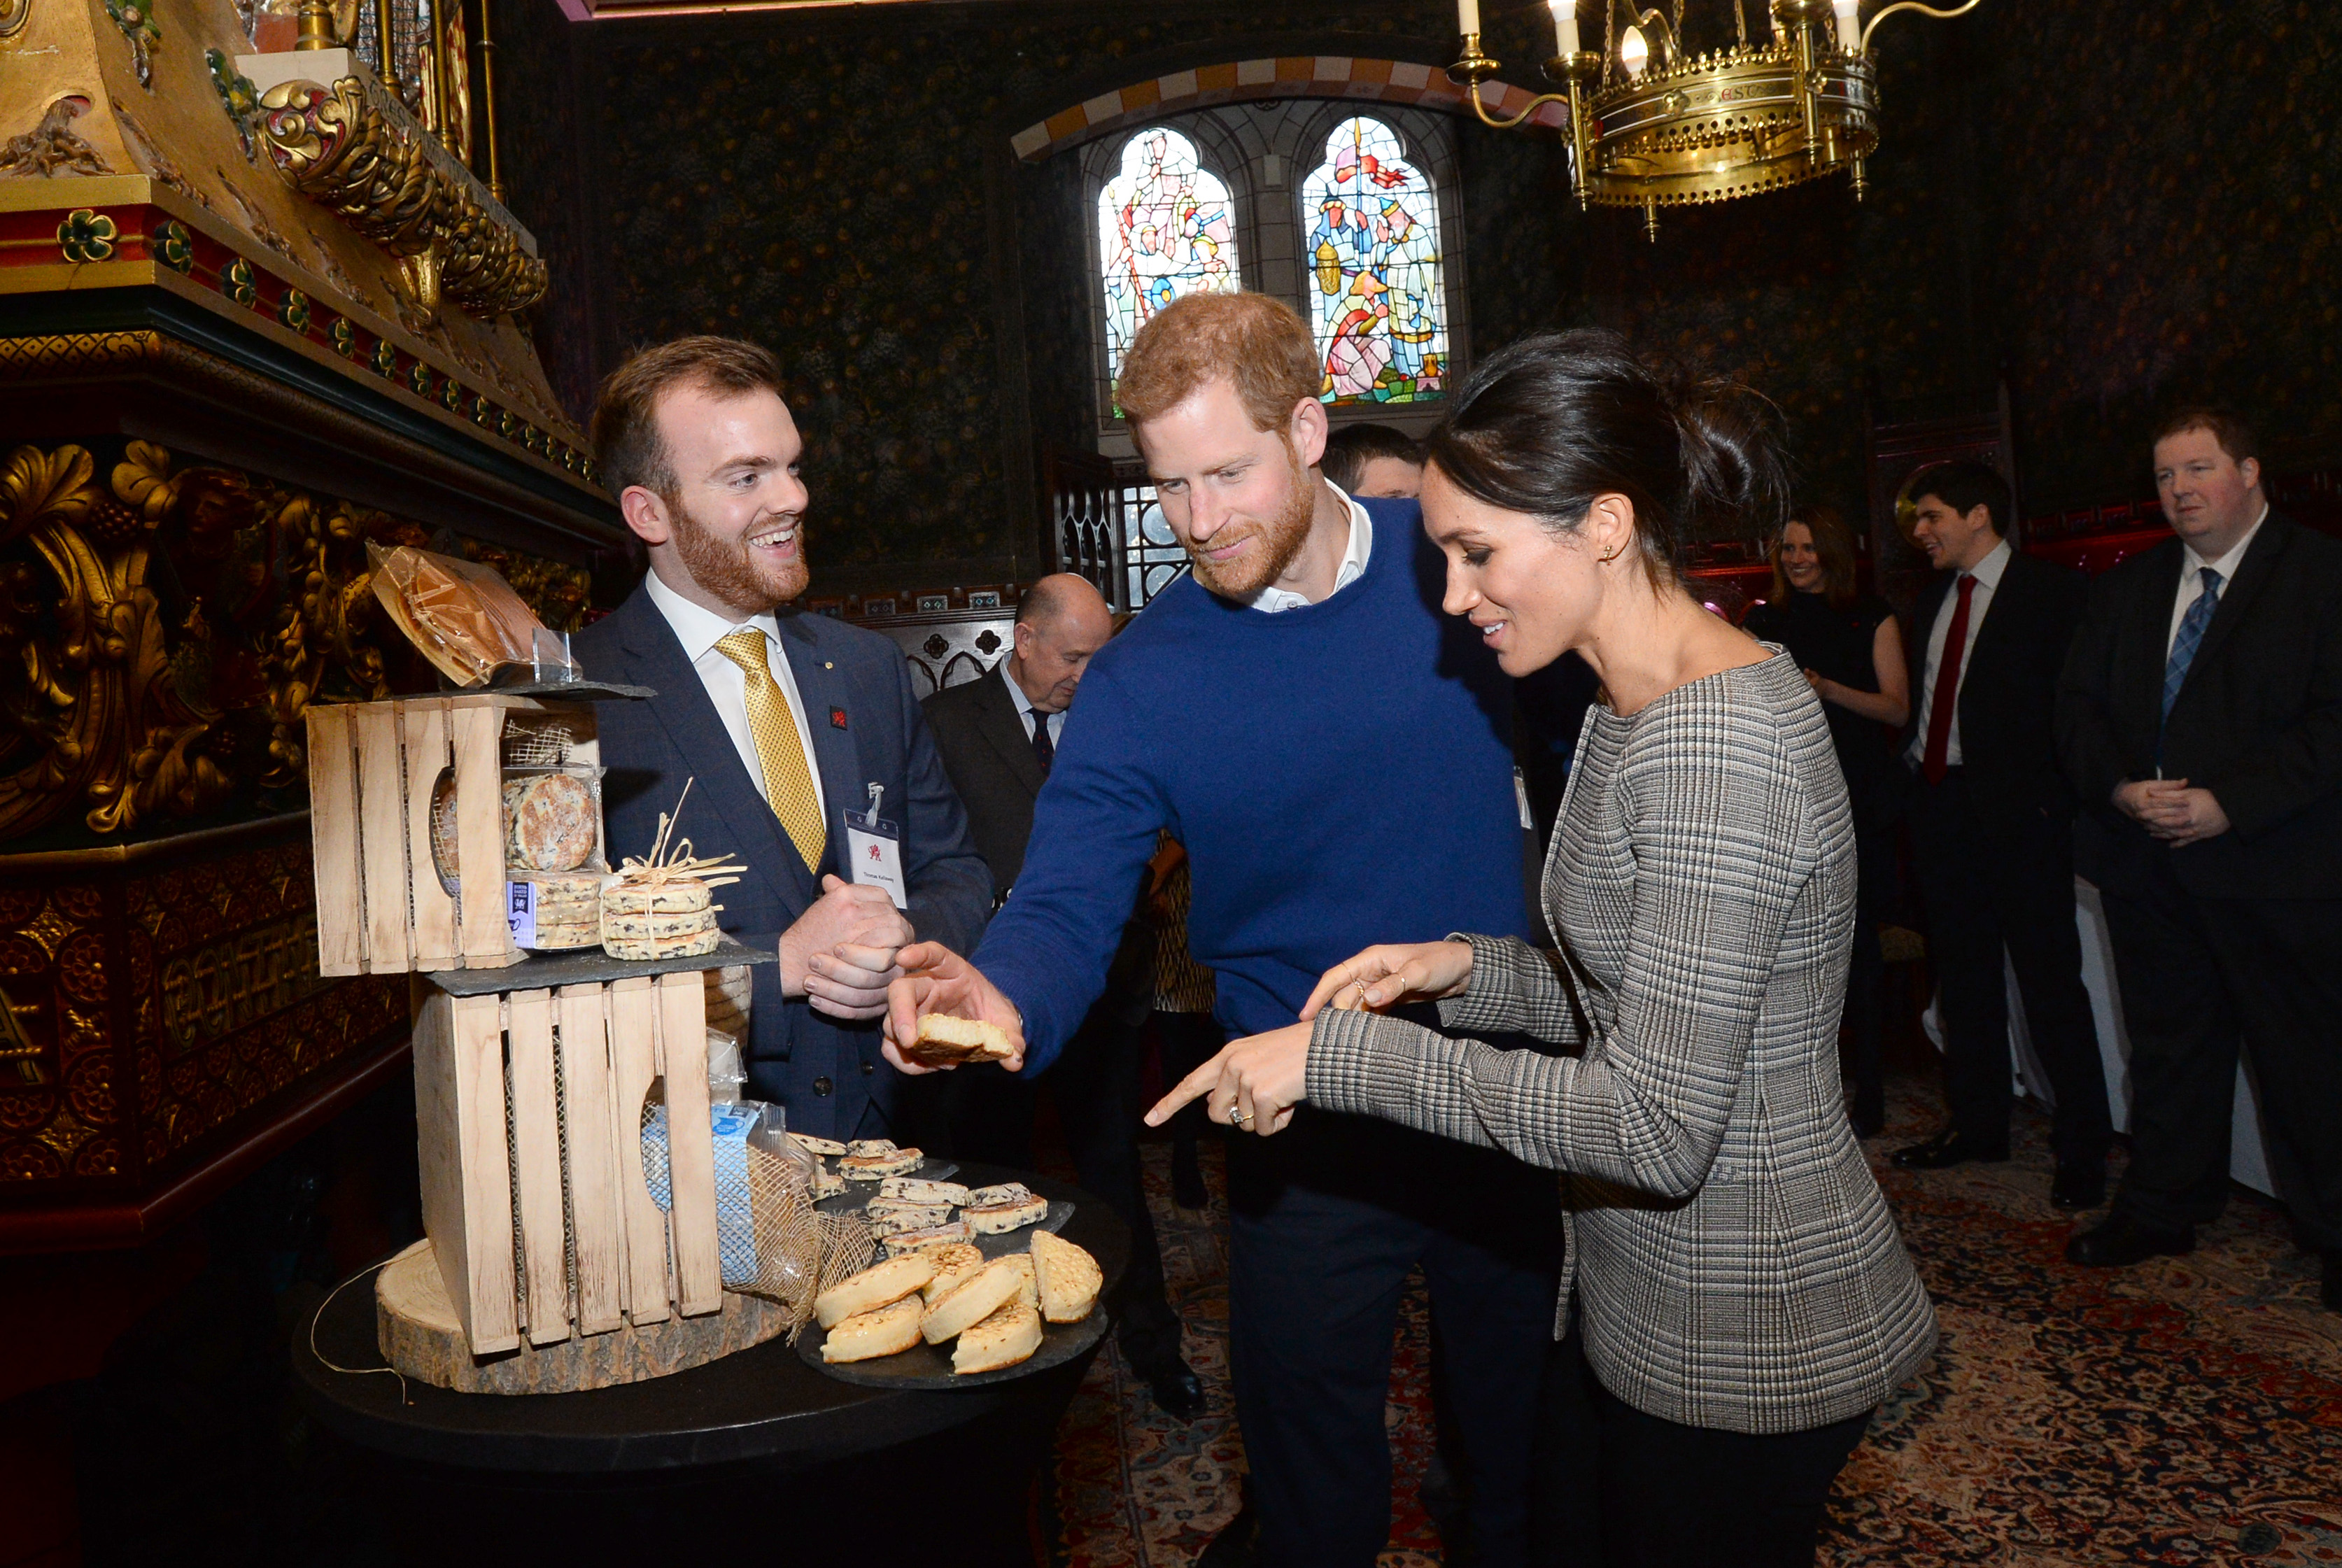 Bakery aiming for Meghan Markle sparkle in at food show in Dubai